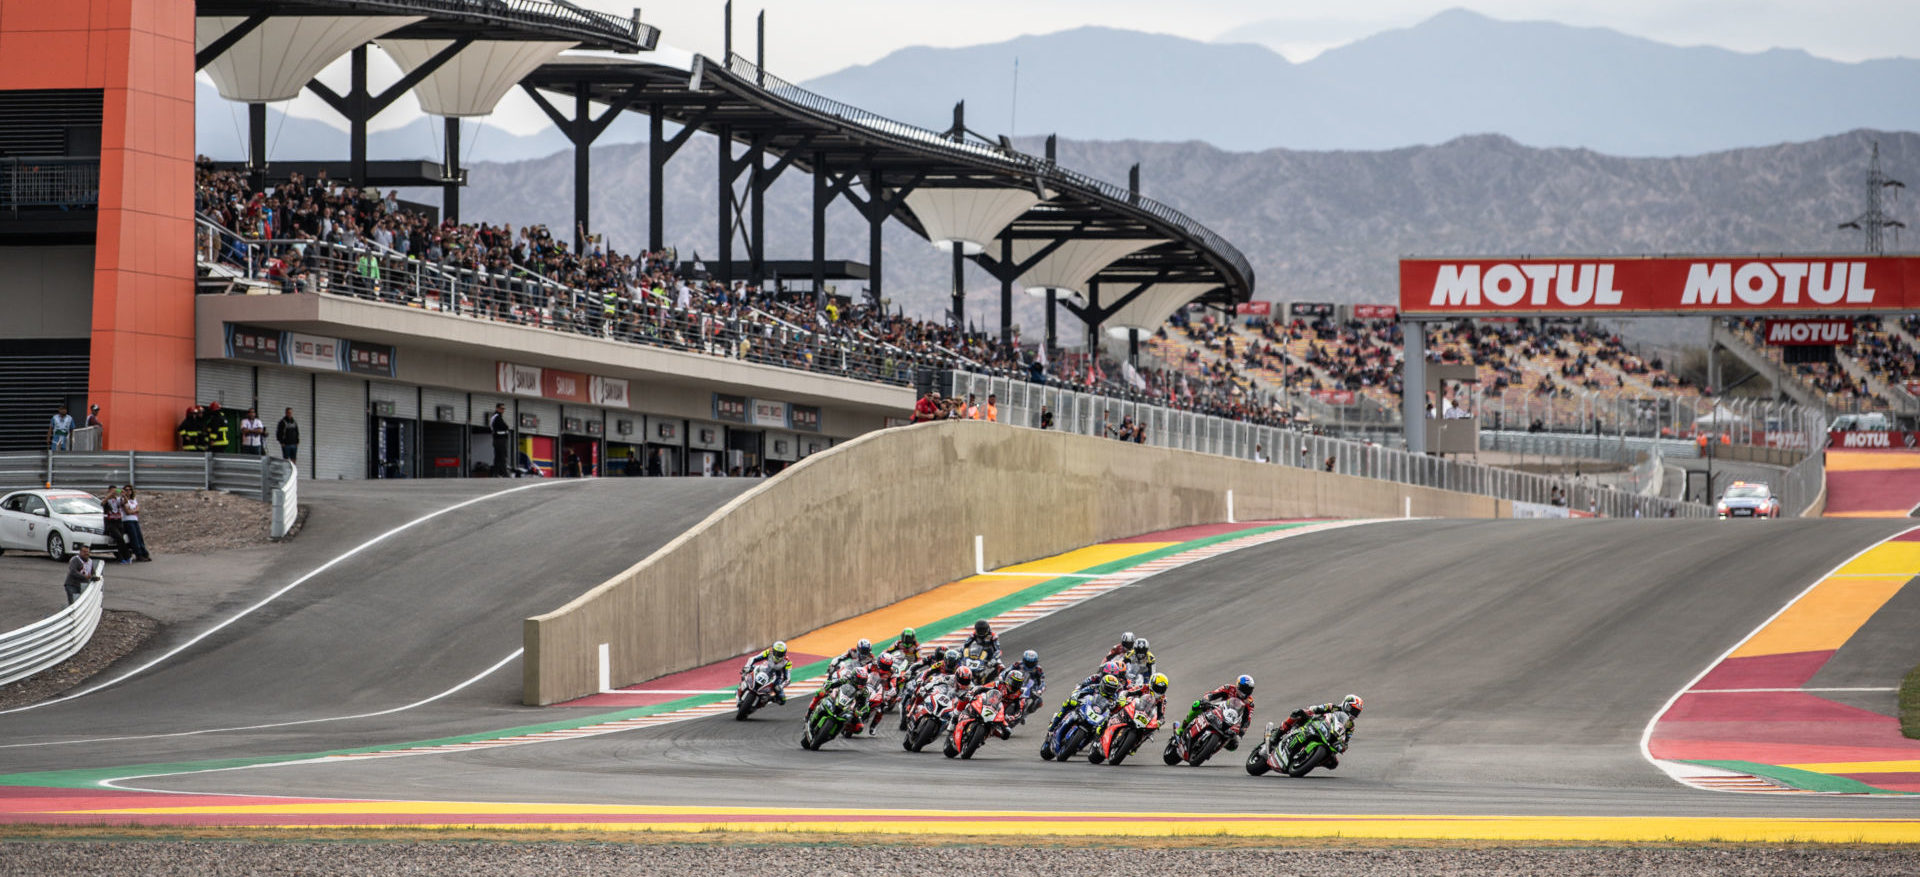 The start of World Superbike Race Two in Argentina in 2019. Photo courtesy Kawasaki.